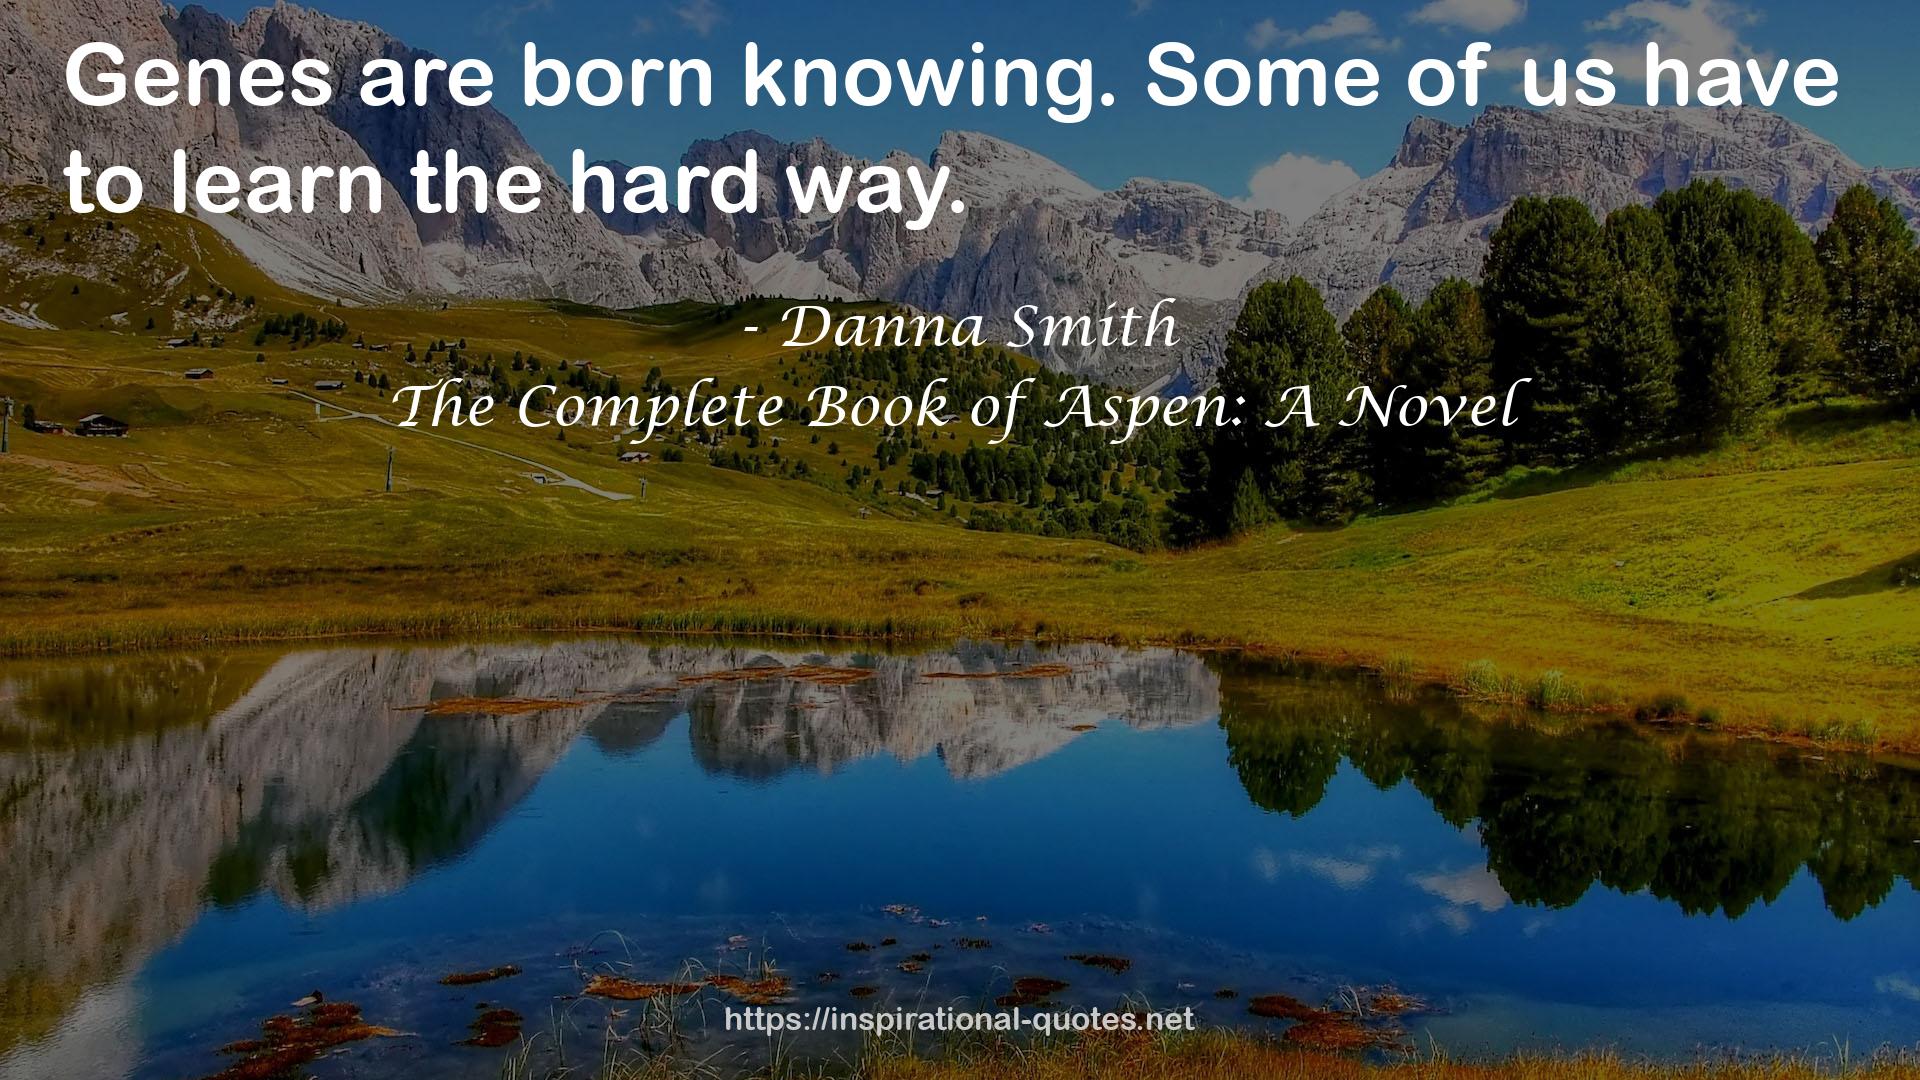 The Complete Book of Aspen: A Novel QUOTES